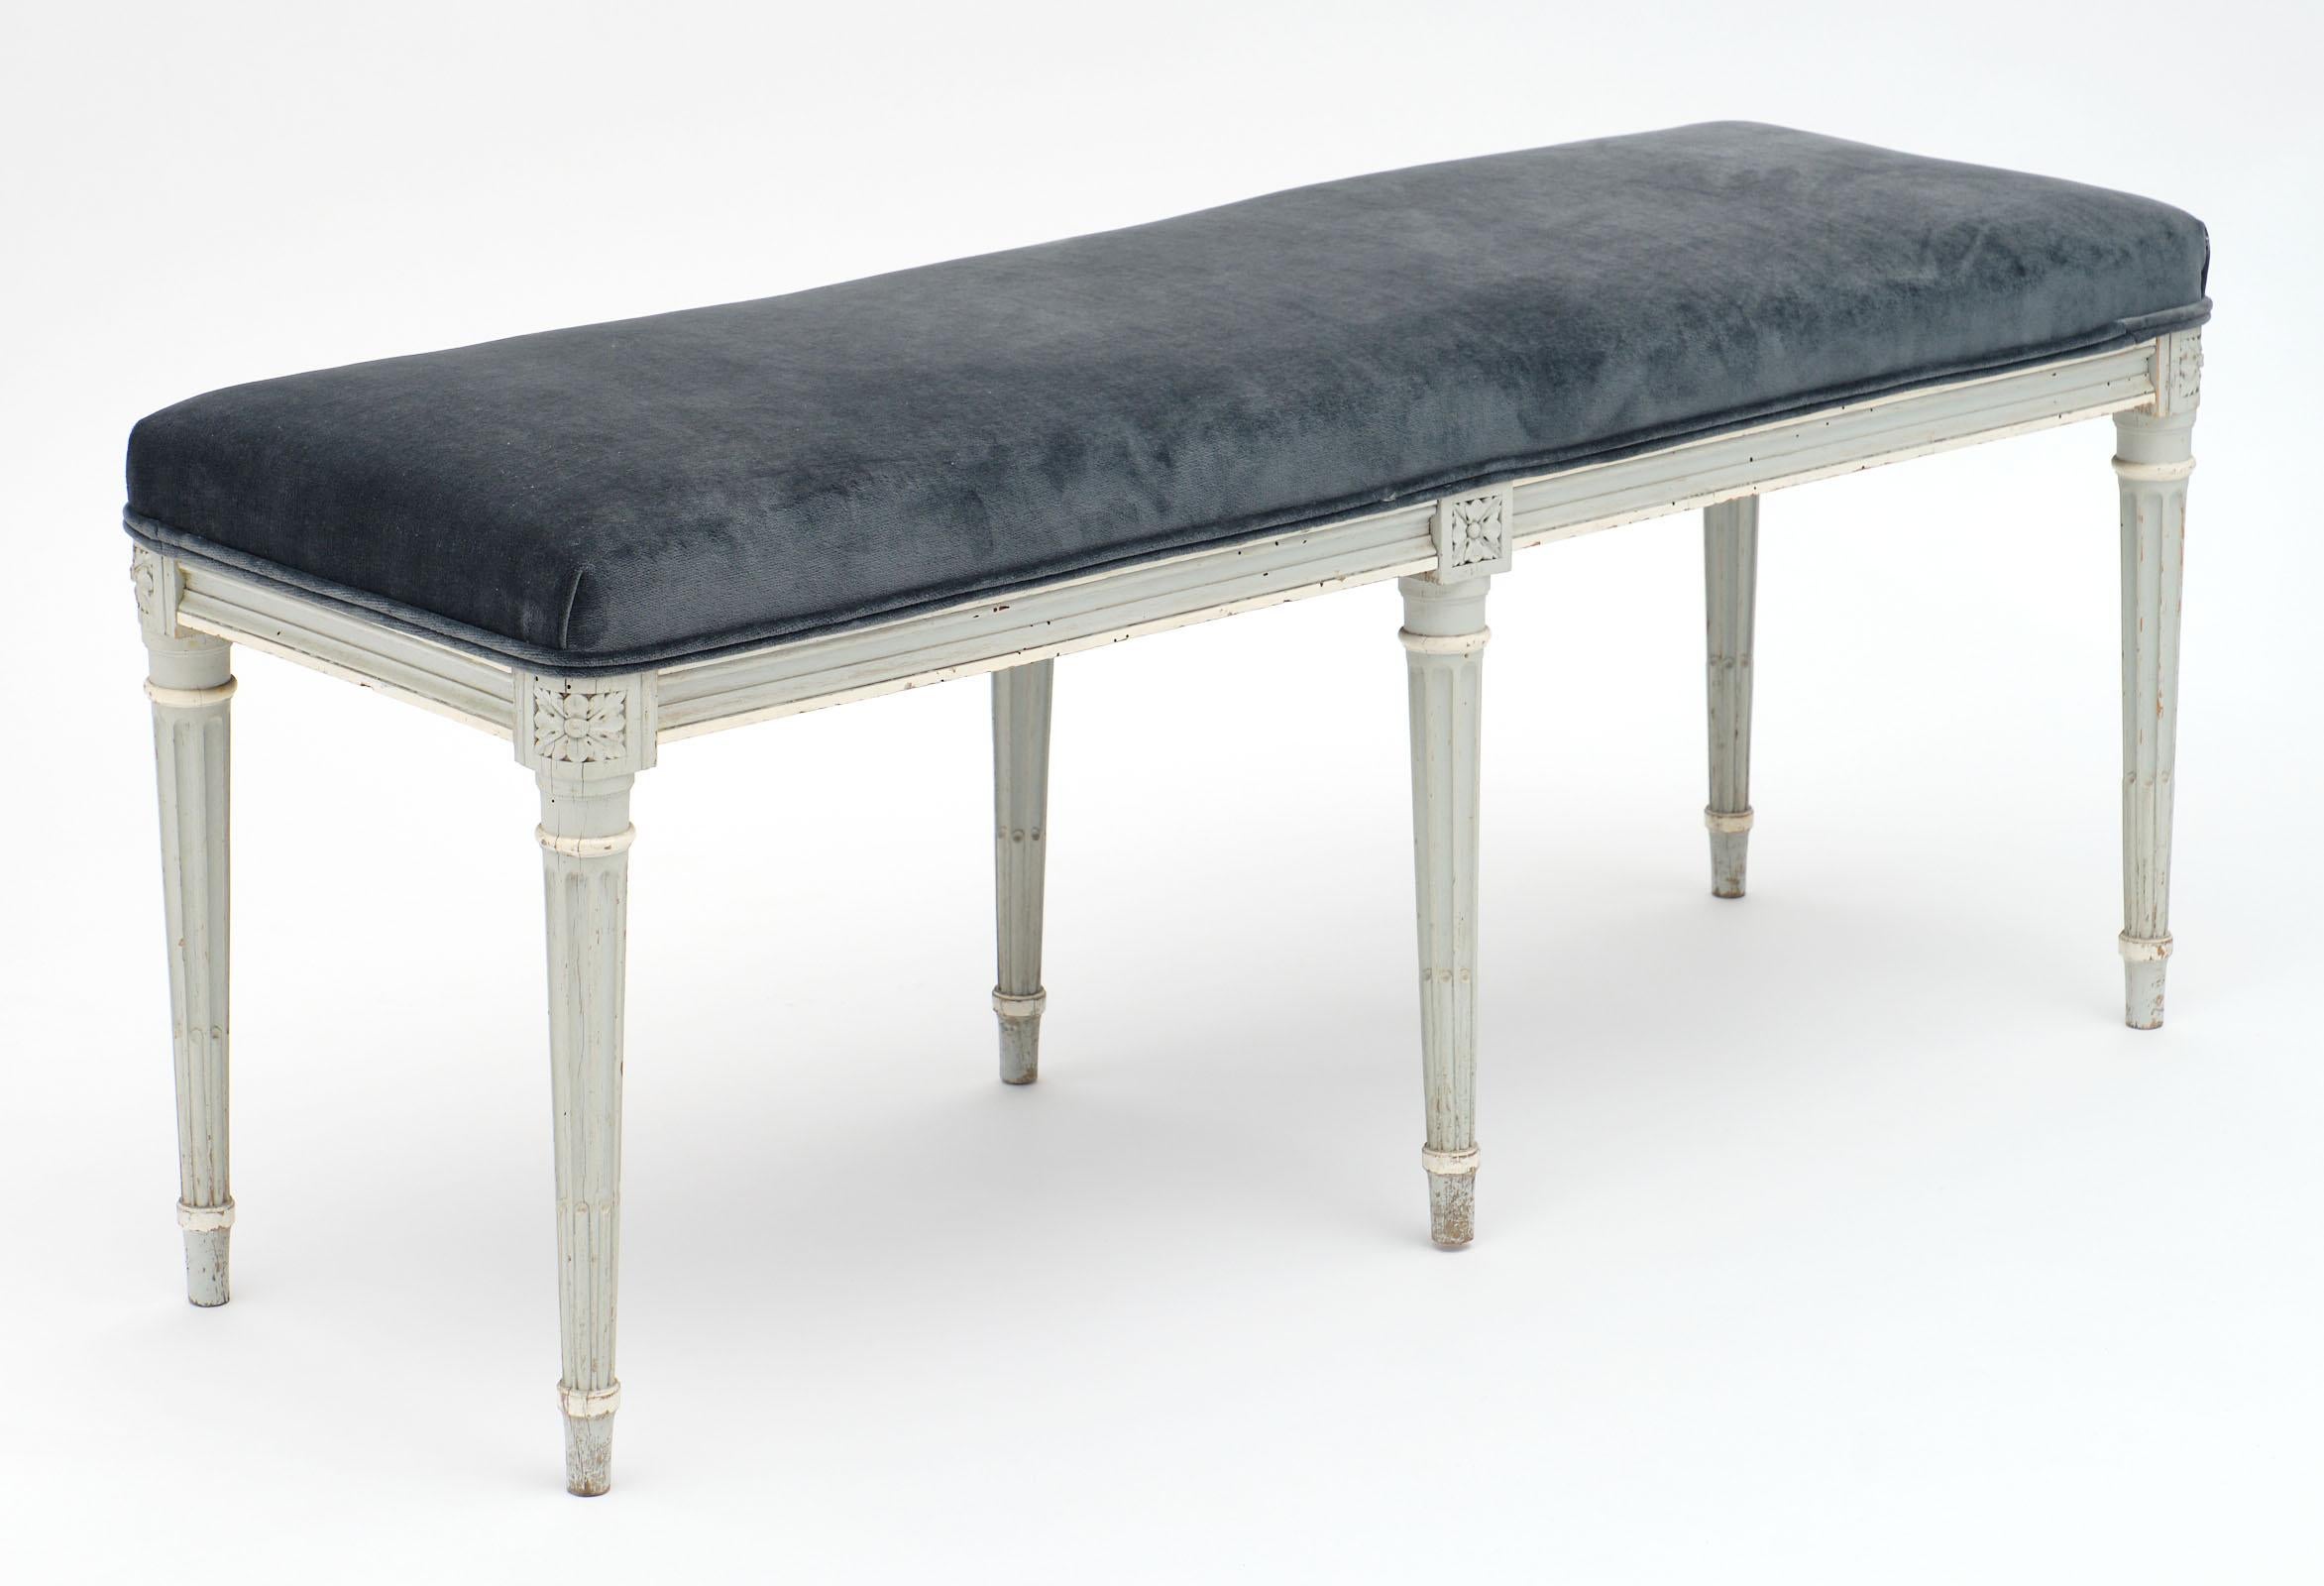 French antique Louis XVI style velvet piano bench made of painted beechwood. This piece has been newly upholstered in a blue gray velvet blend with double cording. The frame has hand carved legs and apron.